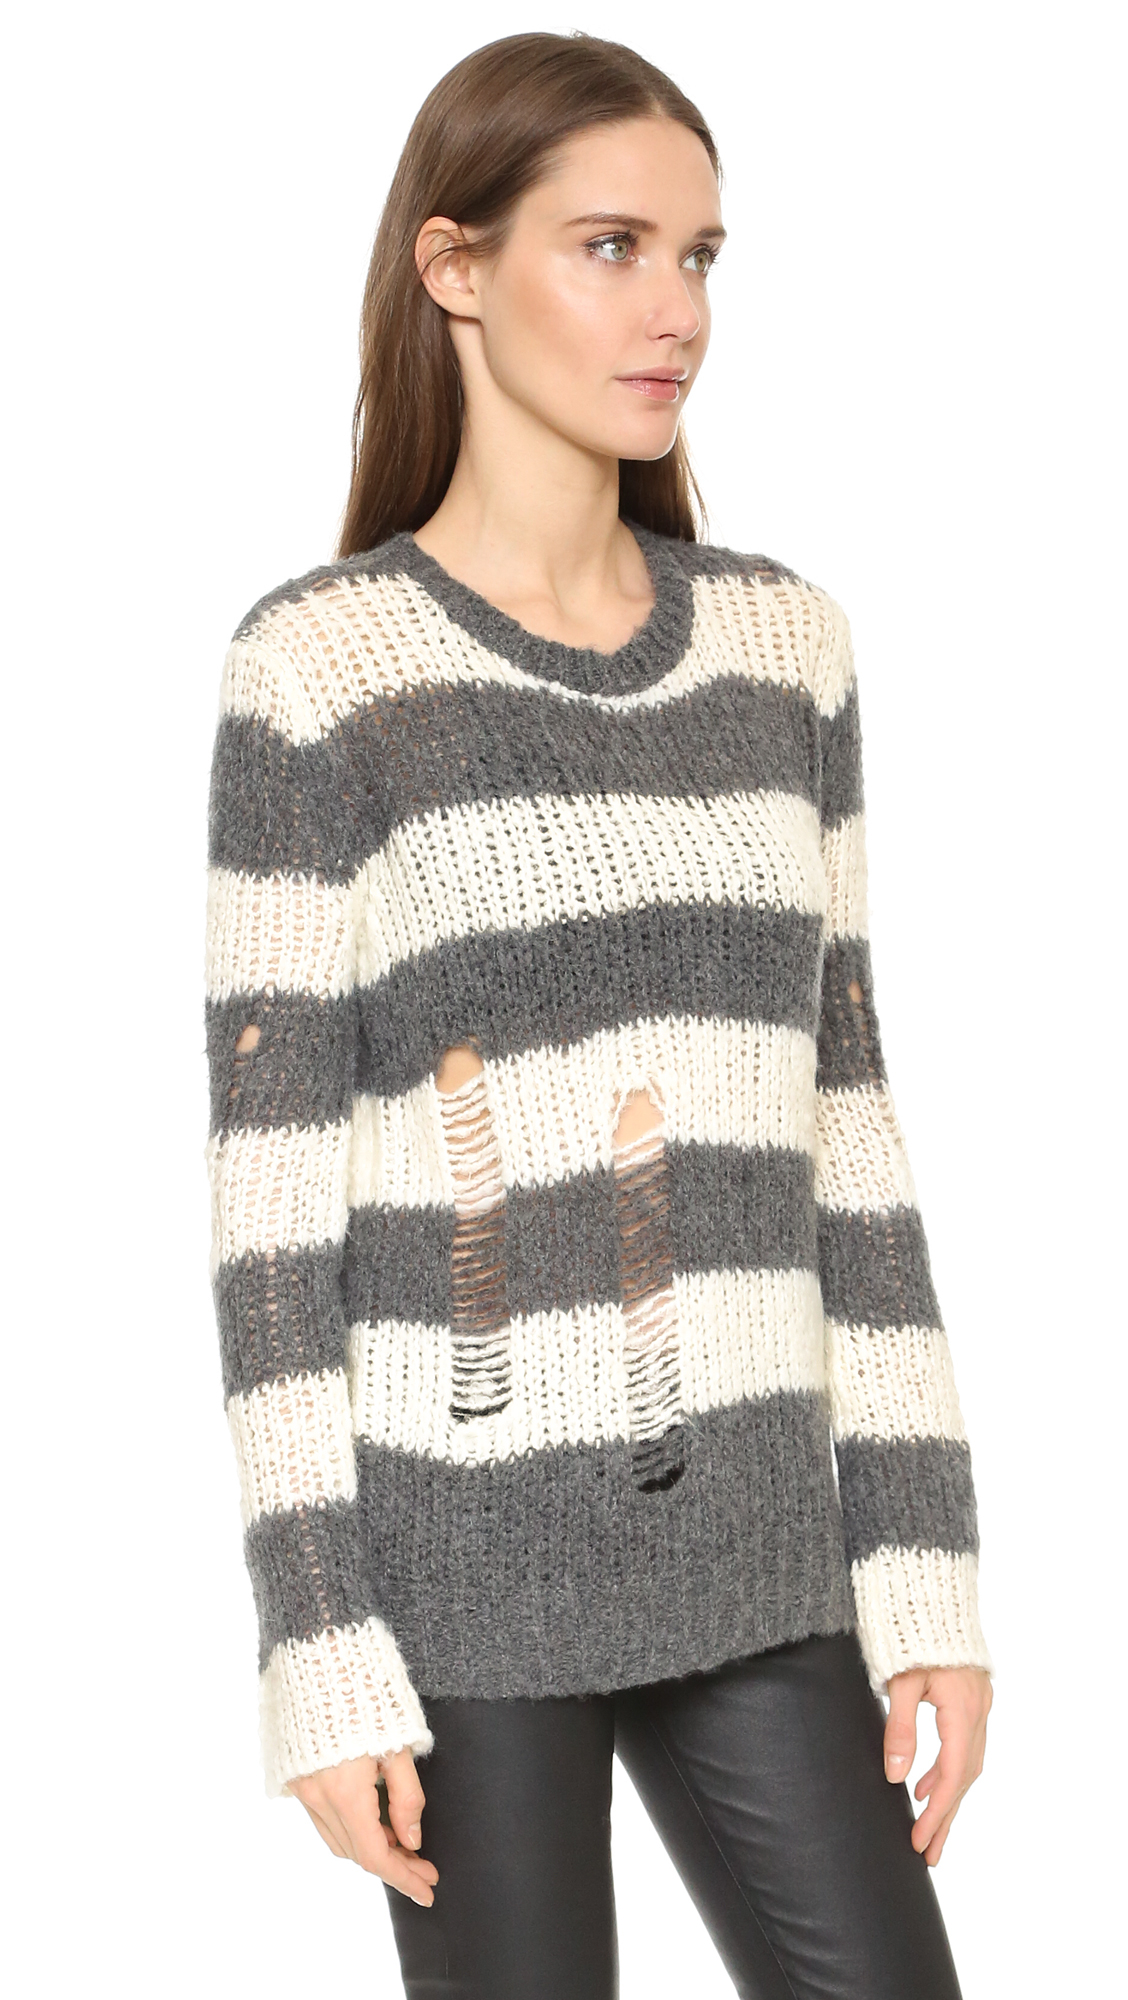 Lyst - Pam & Gela Holey Sweater - Cream/charcoal Heather in Natural